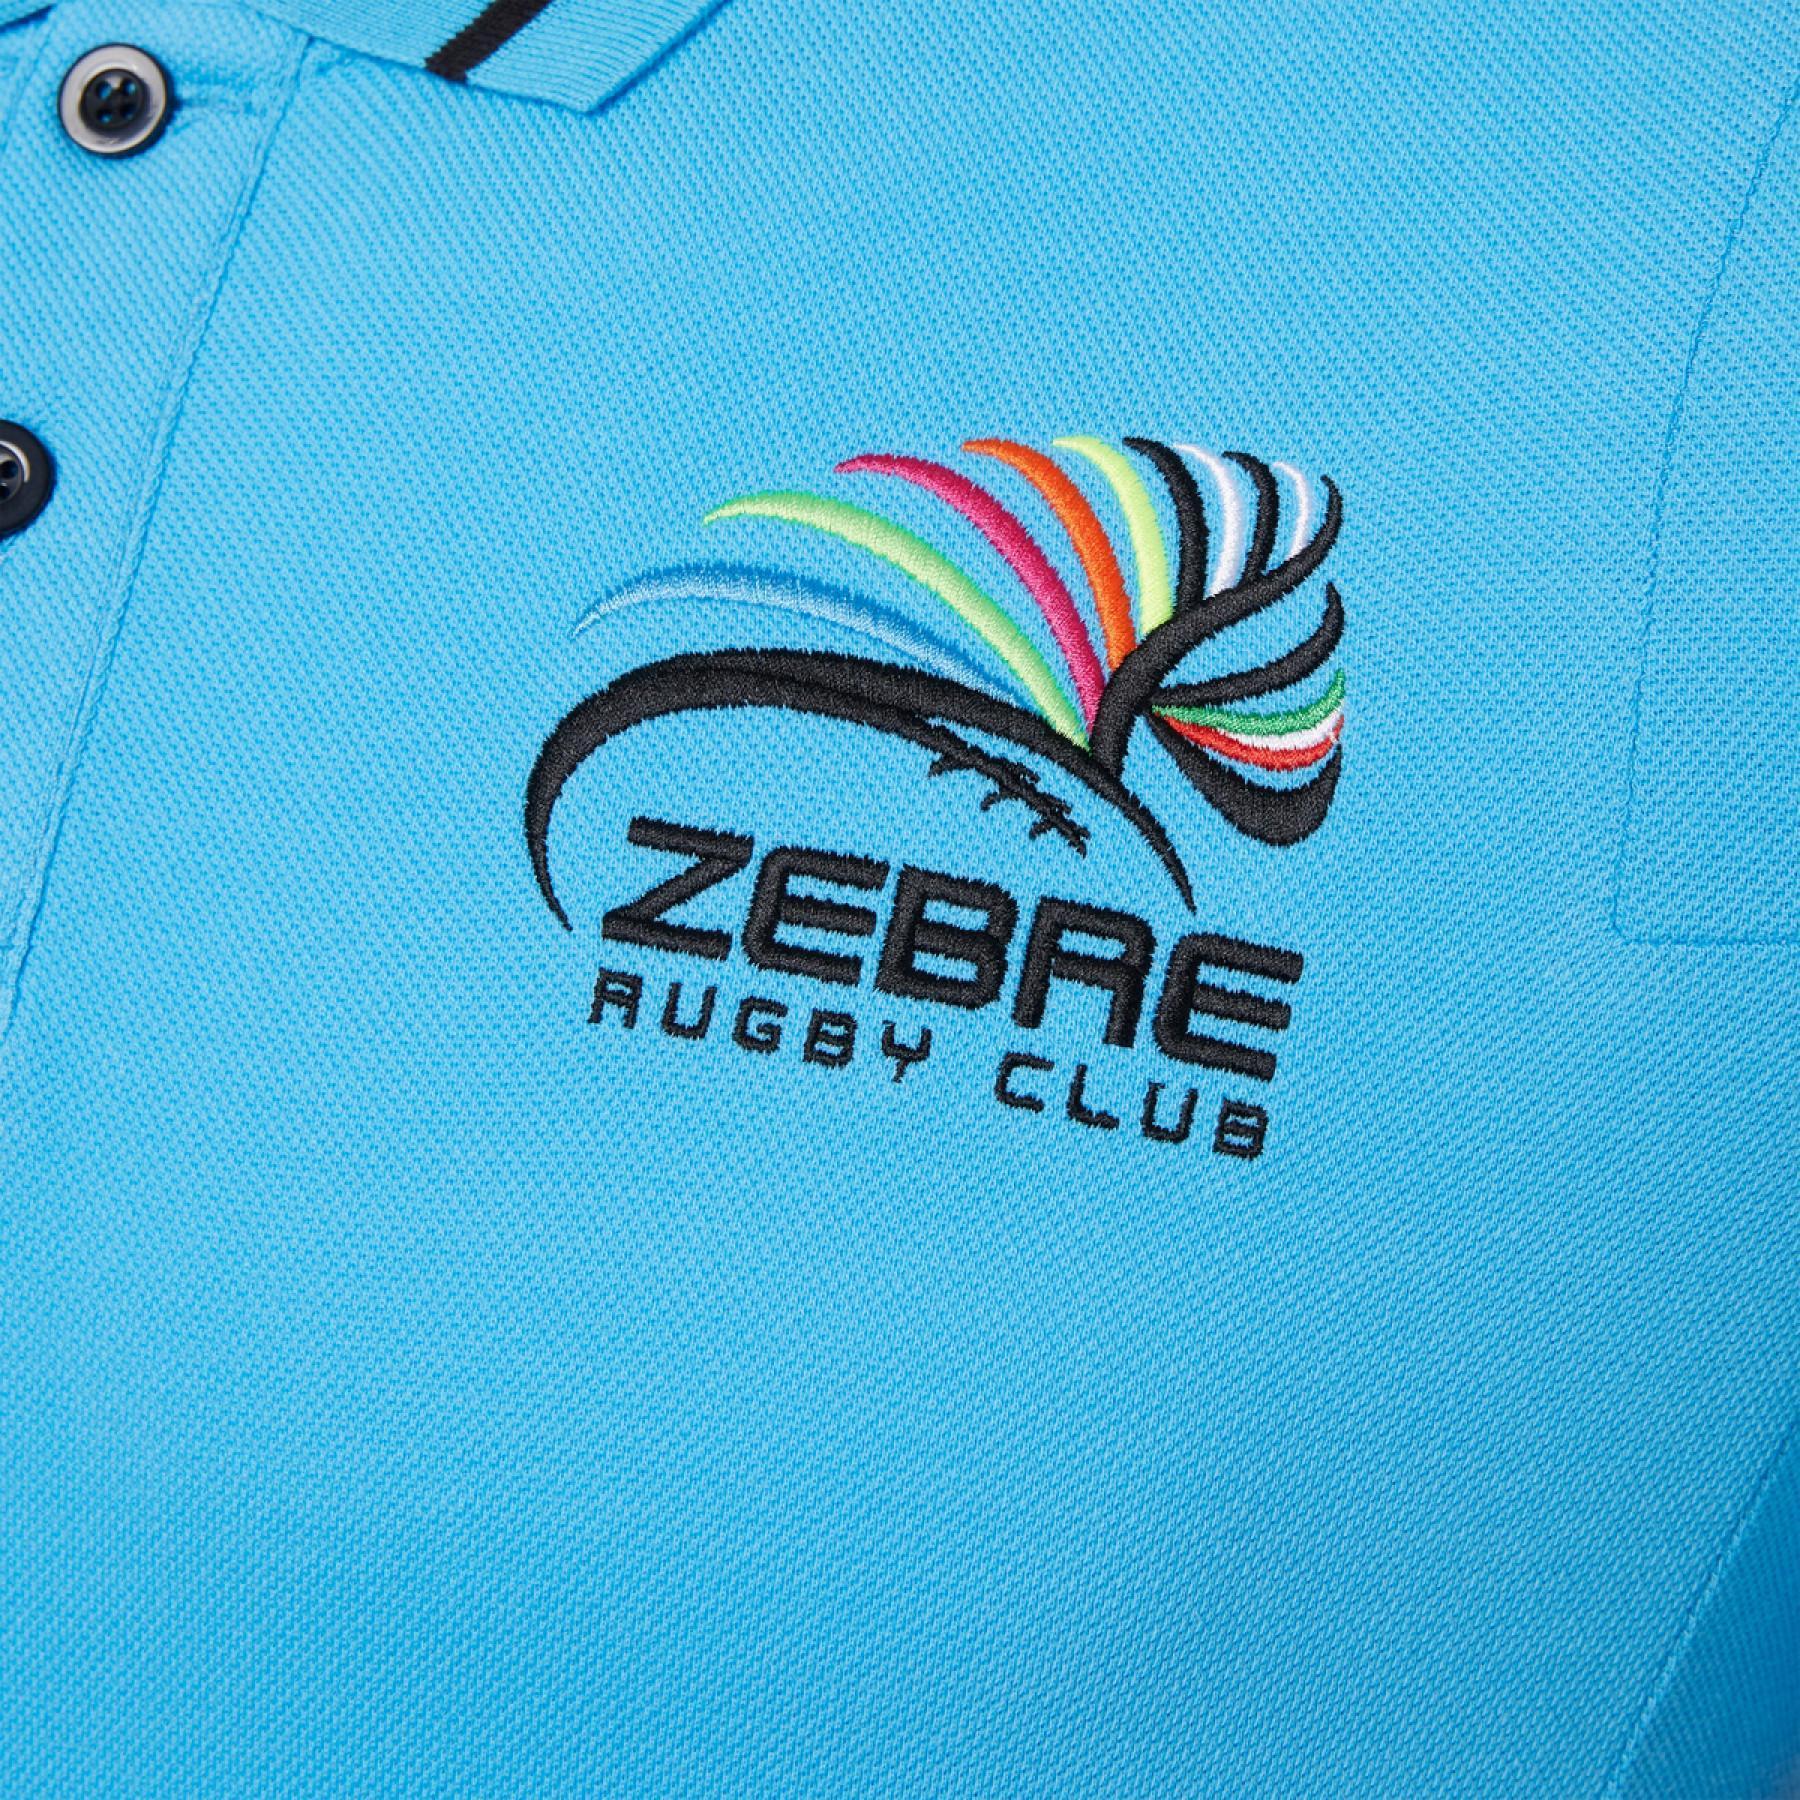 Polo travel zebre rugby 2020/21